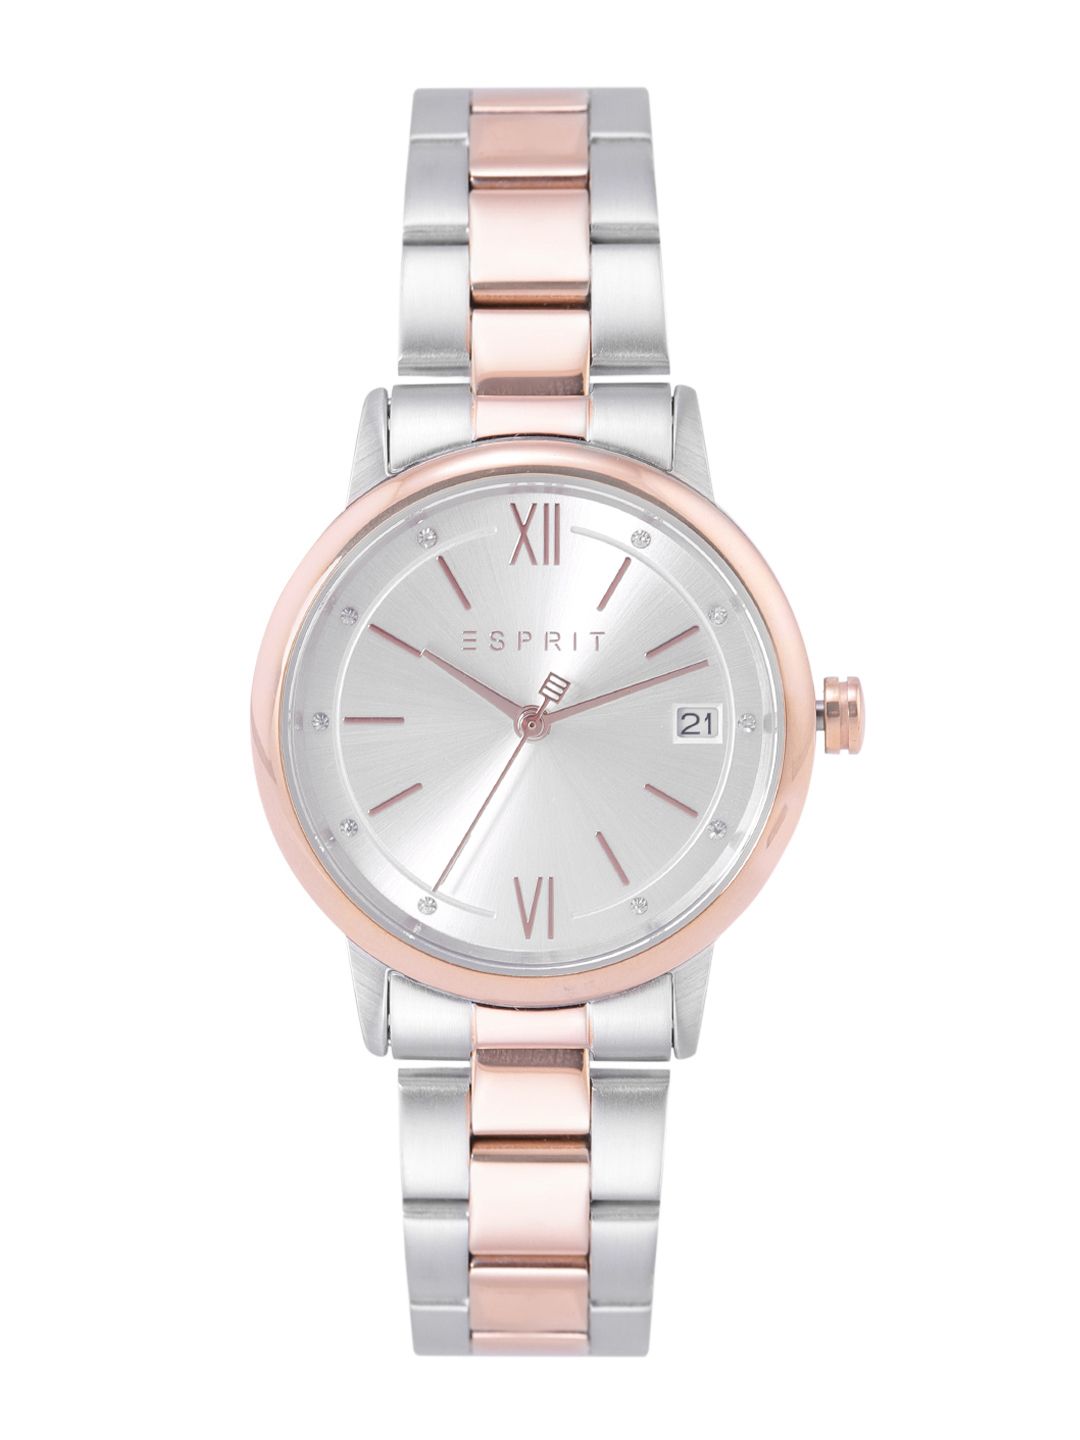 ESPRIT Women Silver-Toned Dial & Bracelet Style Straps Analogue Watch ES1L181M0125 Price in India